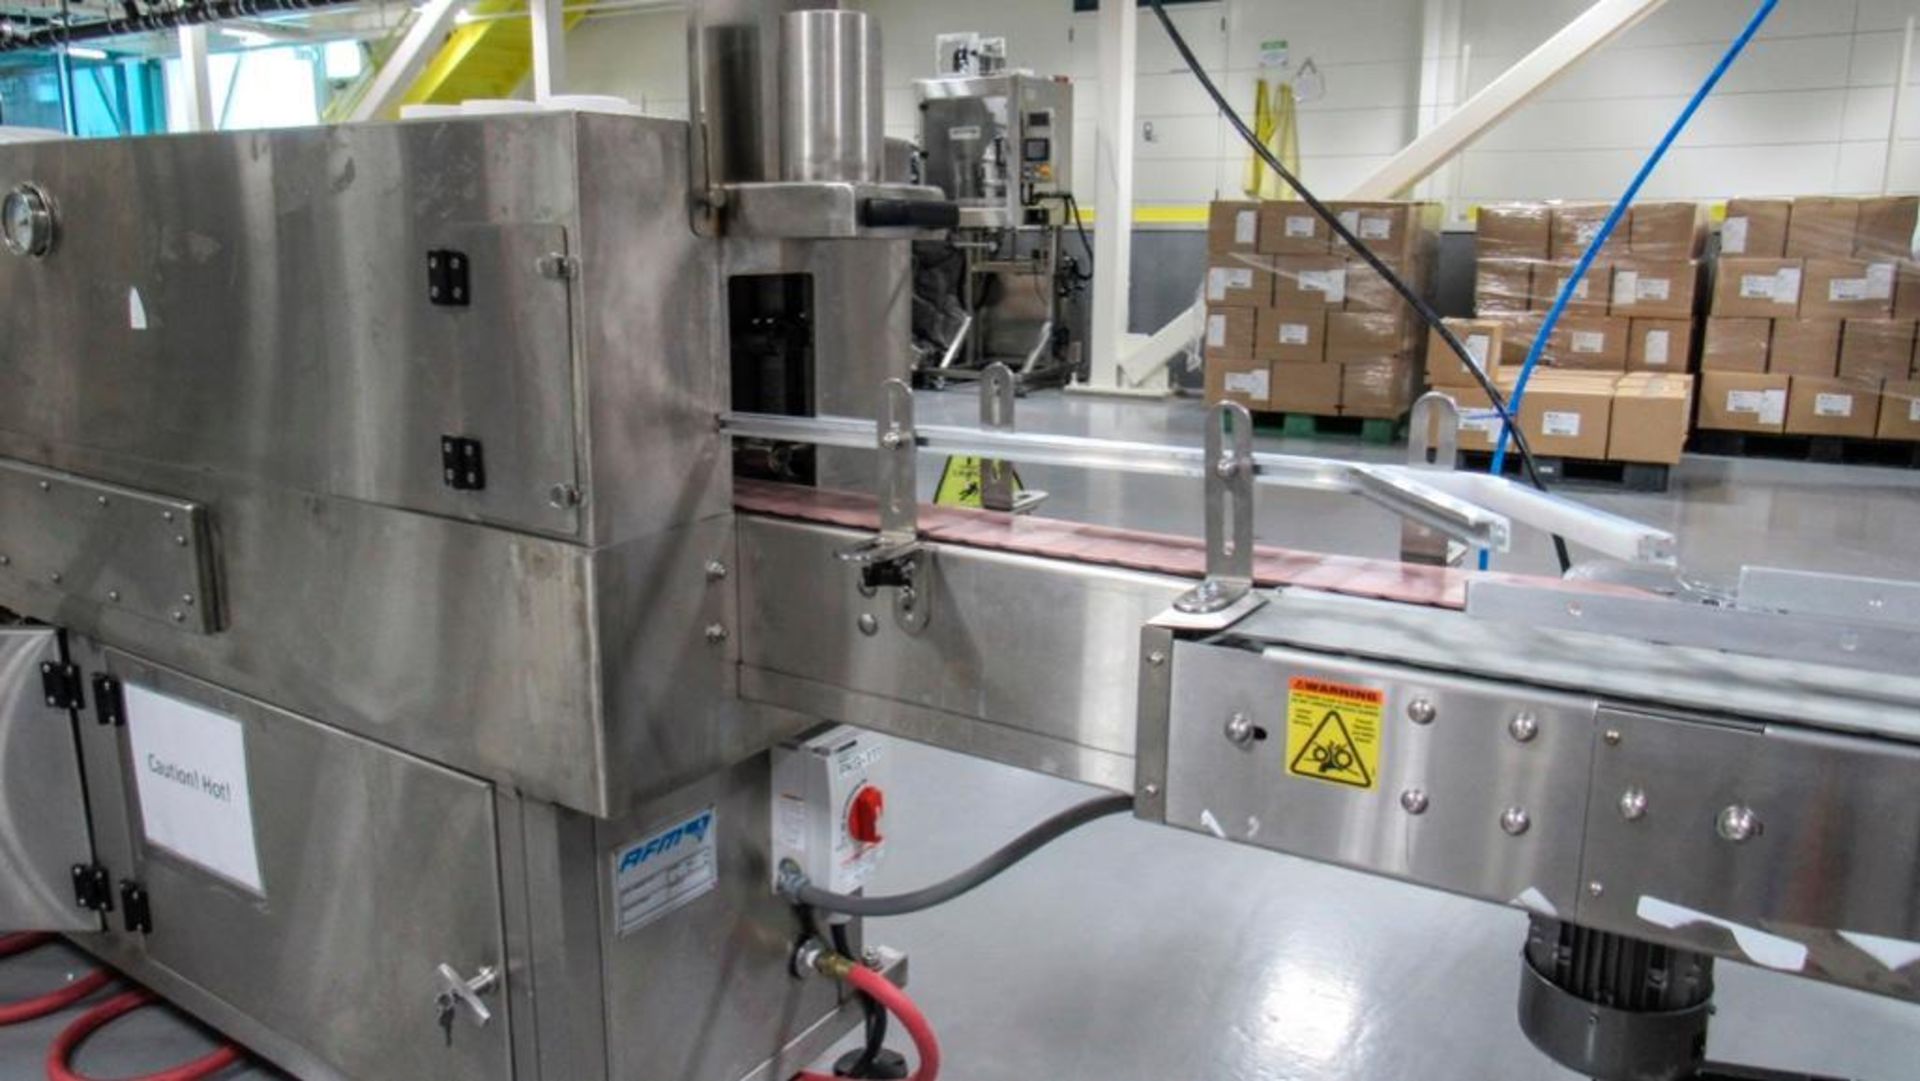 AFM WSN Series Steam Heat Tunnels For Shrink Sleeve Labeling - Image 9 of 13